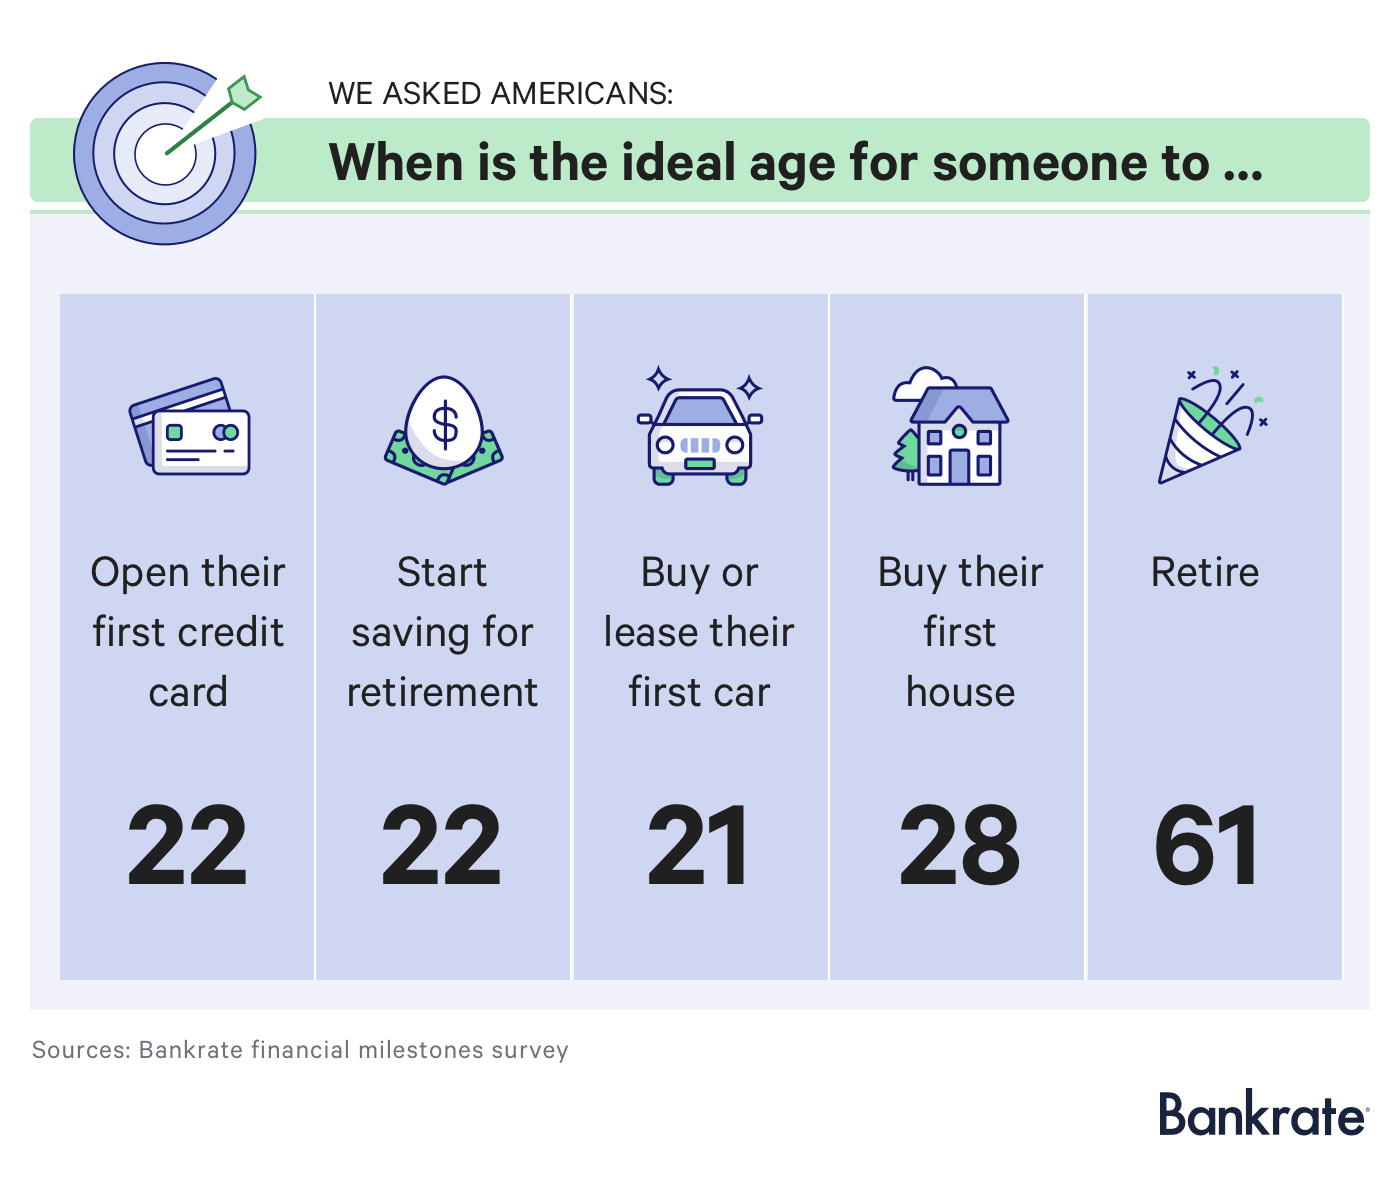 According to a new study from Bankrate, most U.S. adults believe that 28 is the ideal age for buying a first home